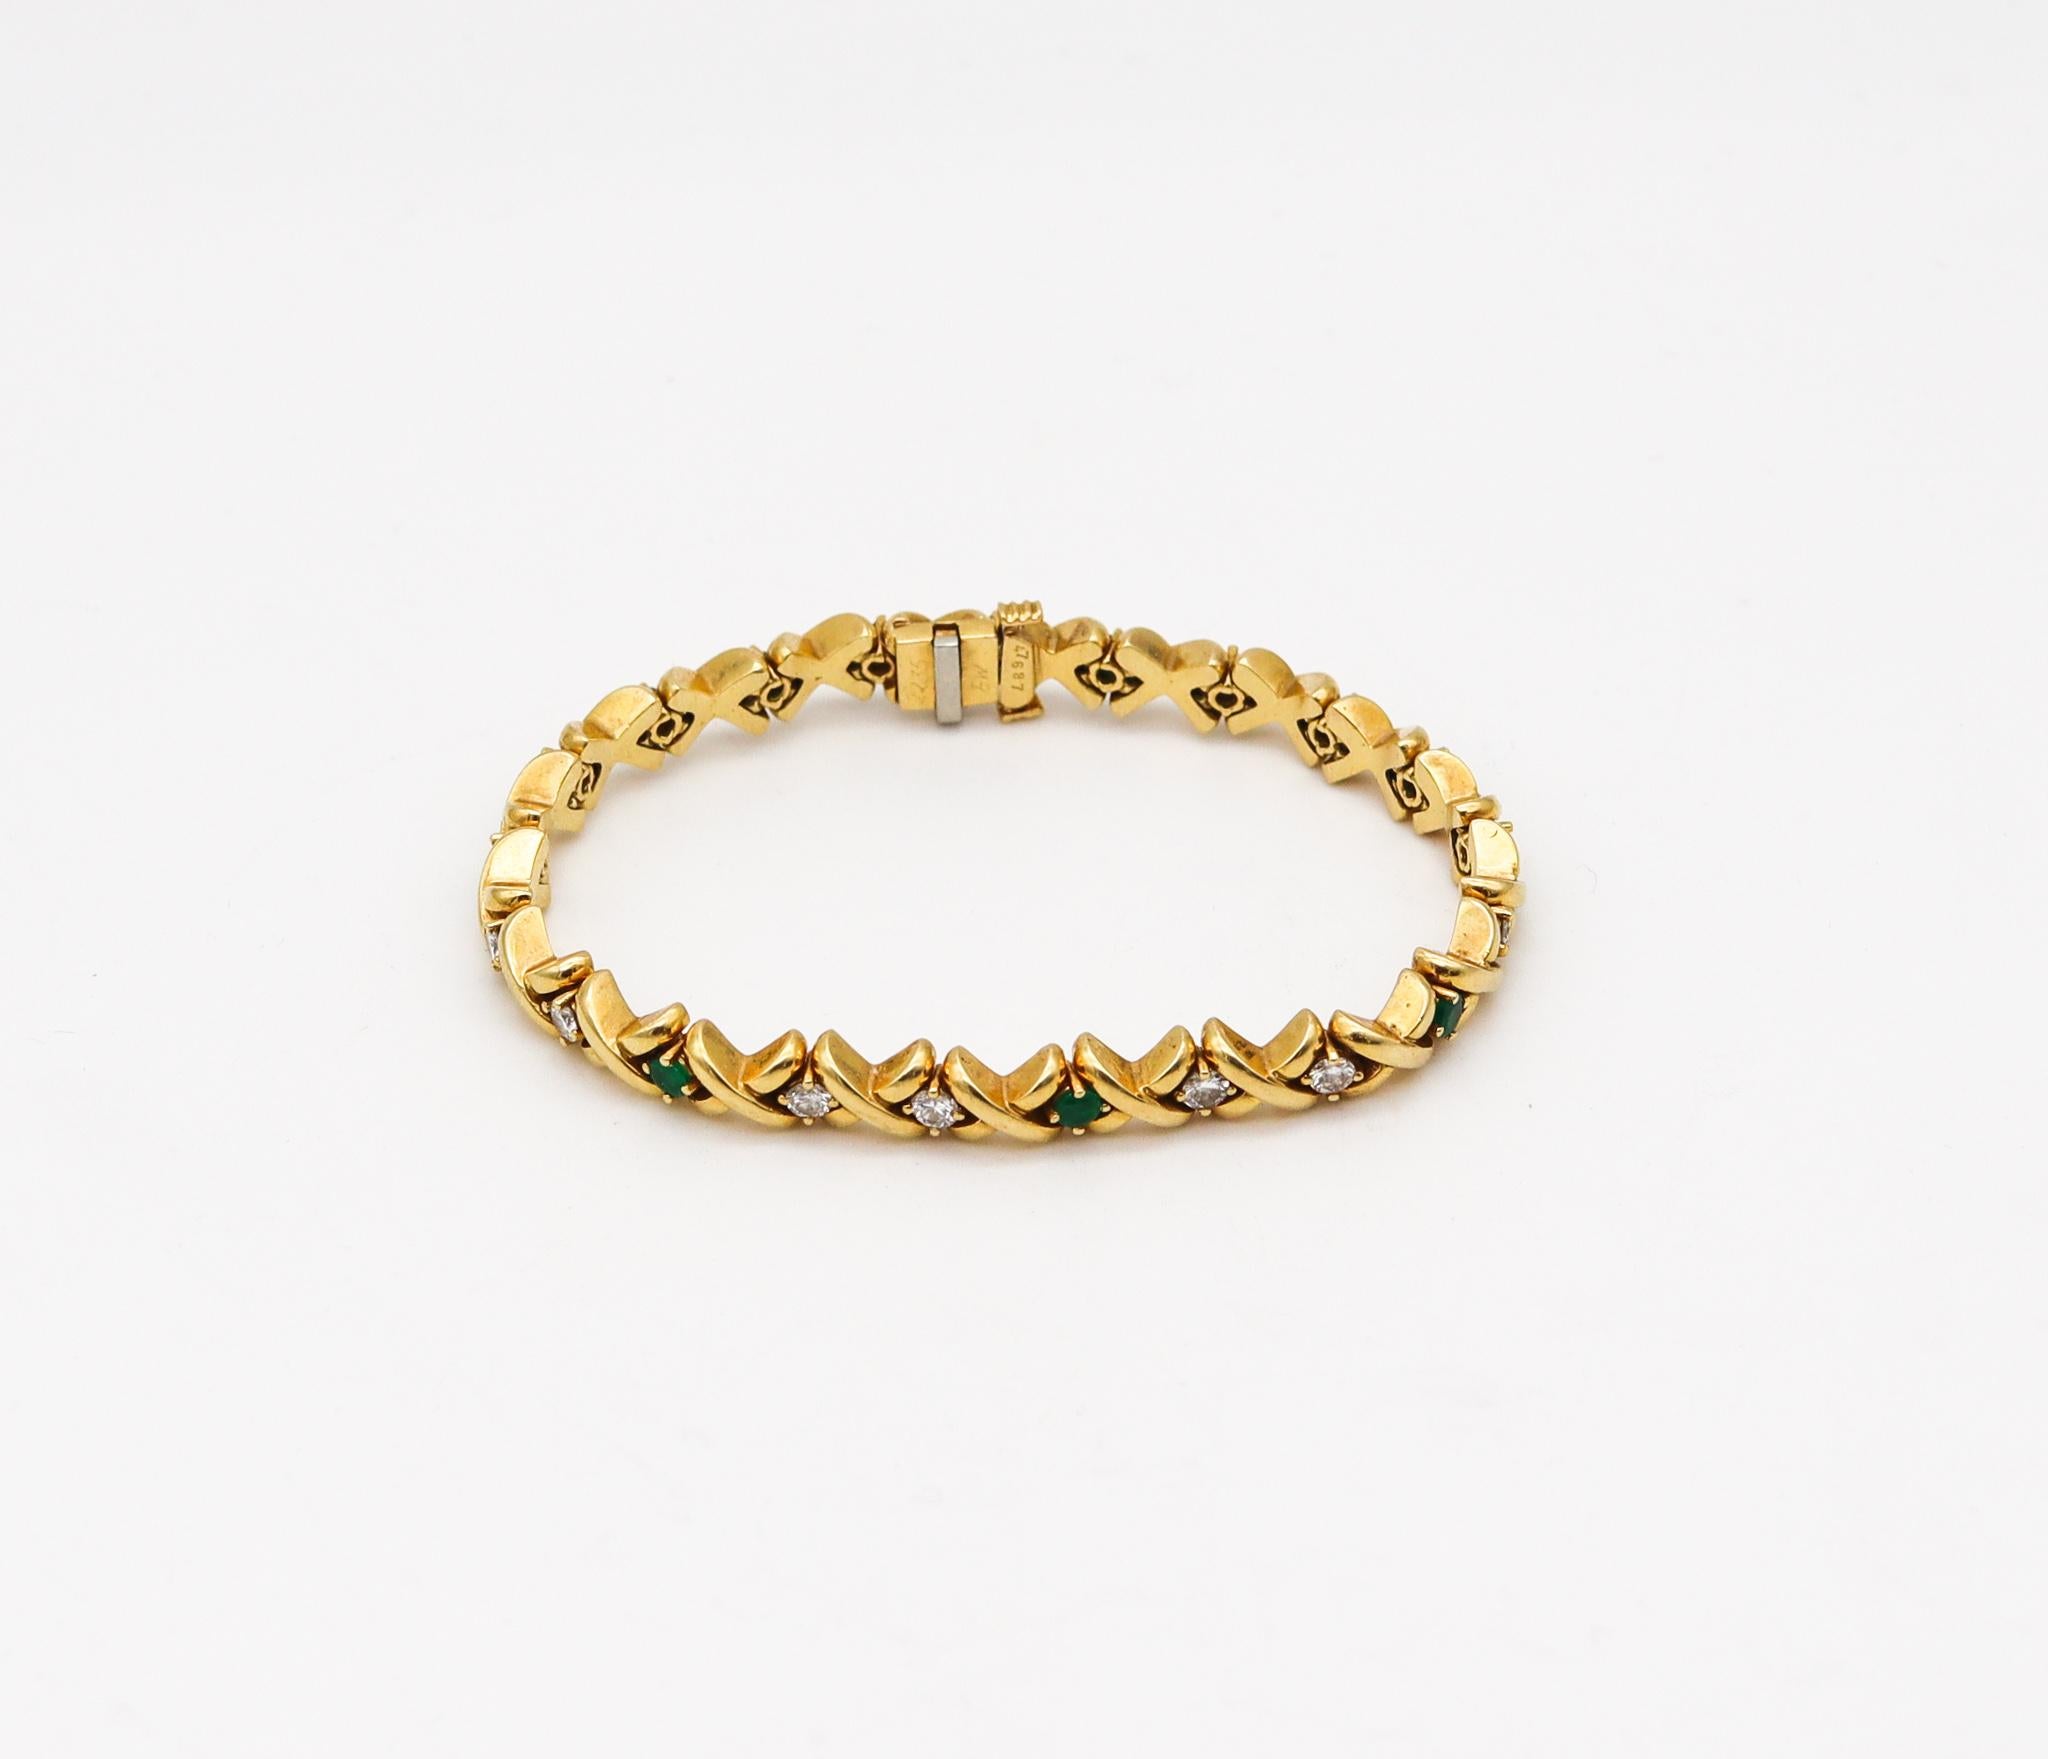 Riviera bracelet designed by Tiffany & Co.

A colorful riviera gemstones bracelet, created by Tiffany & Co. This piece was crafted with the iconic x patterns in solid yellow gold of 18 karats with high polished finish. Fitted with a double push